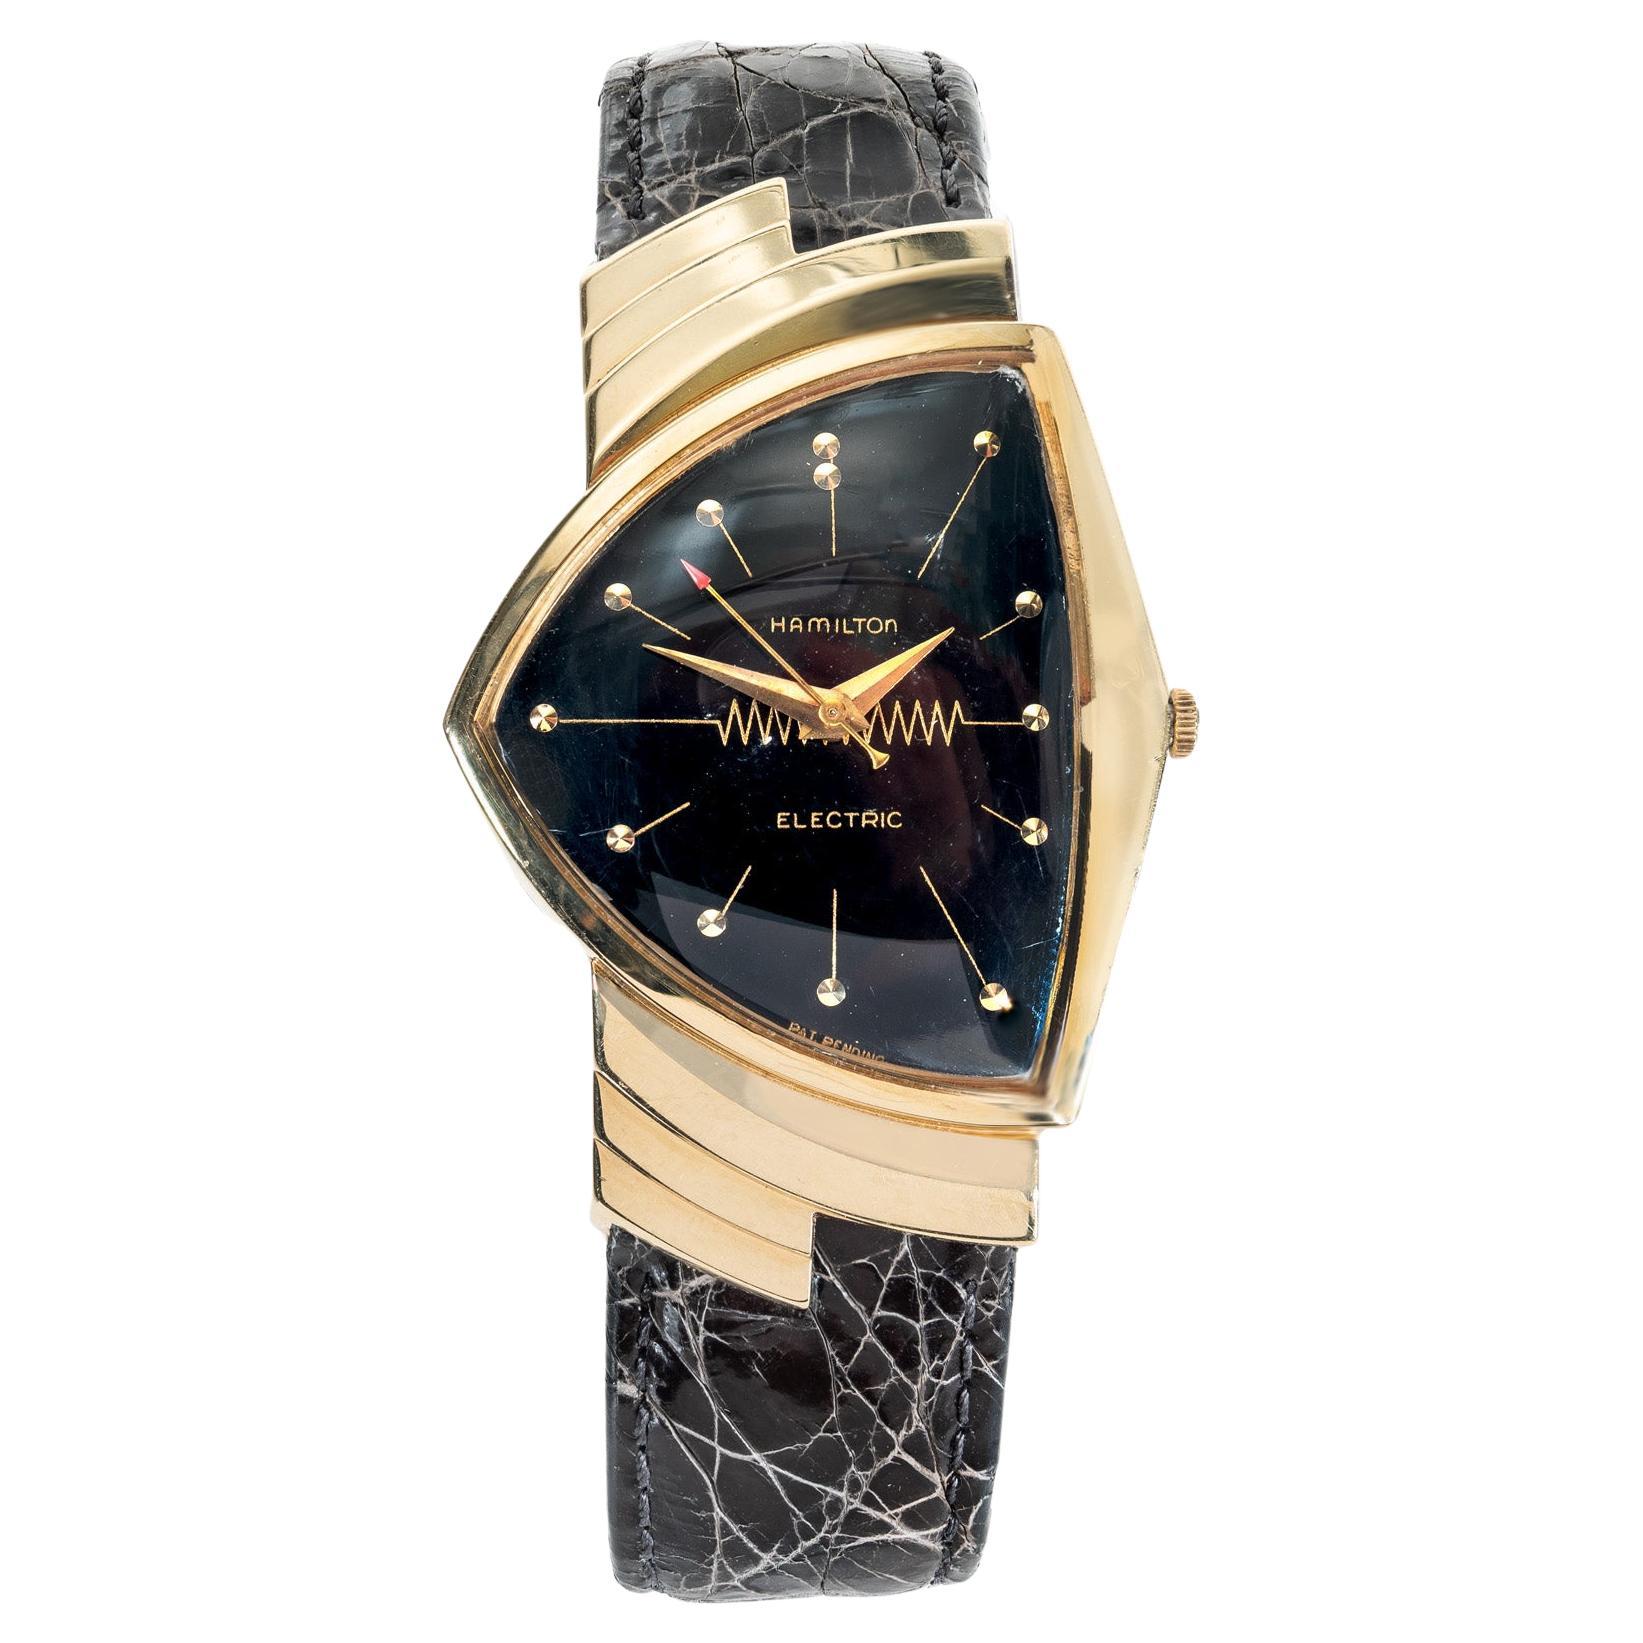 Hamilton Yellow Gold Electric Pacer 500 Wristwatch